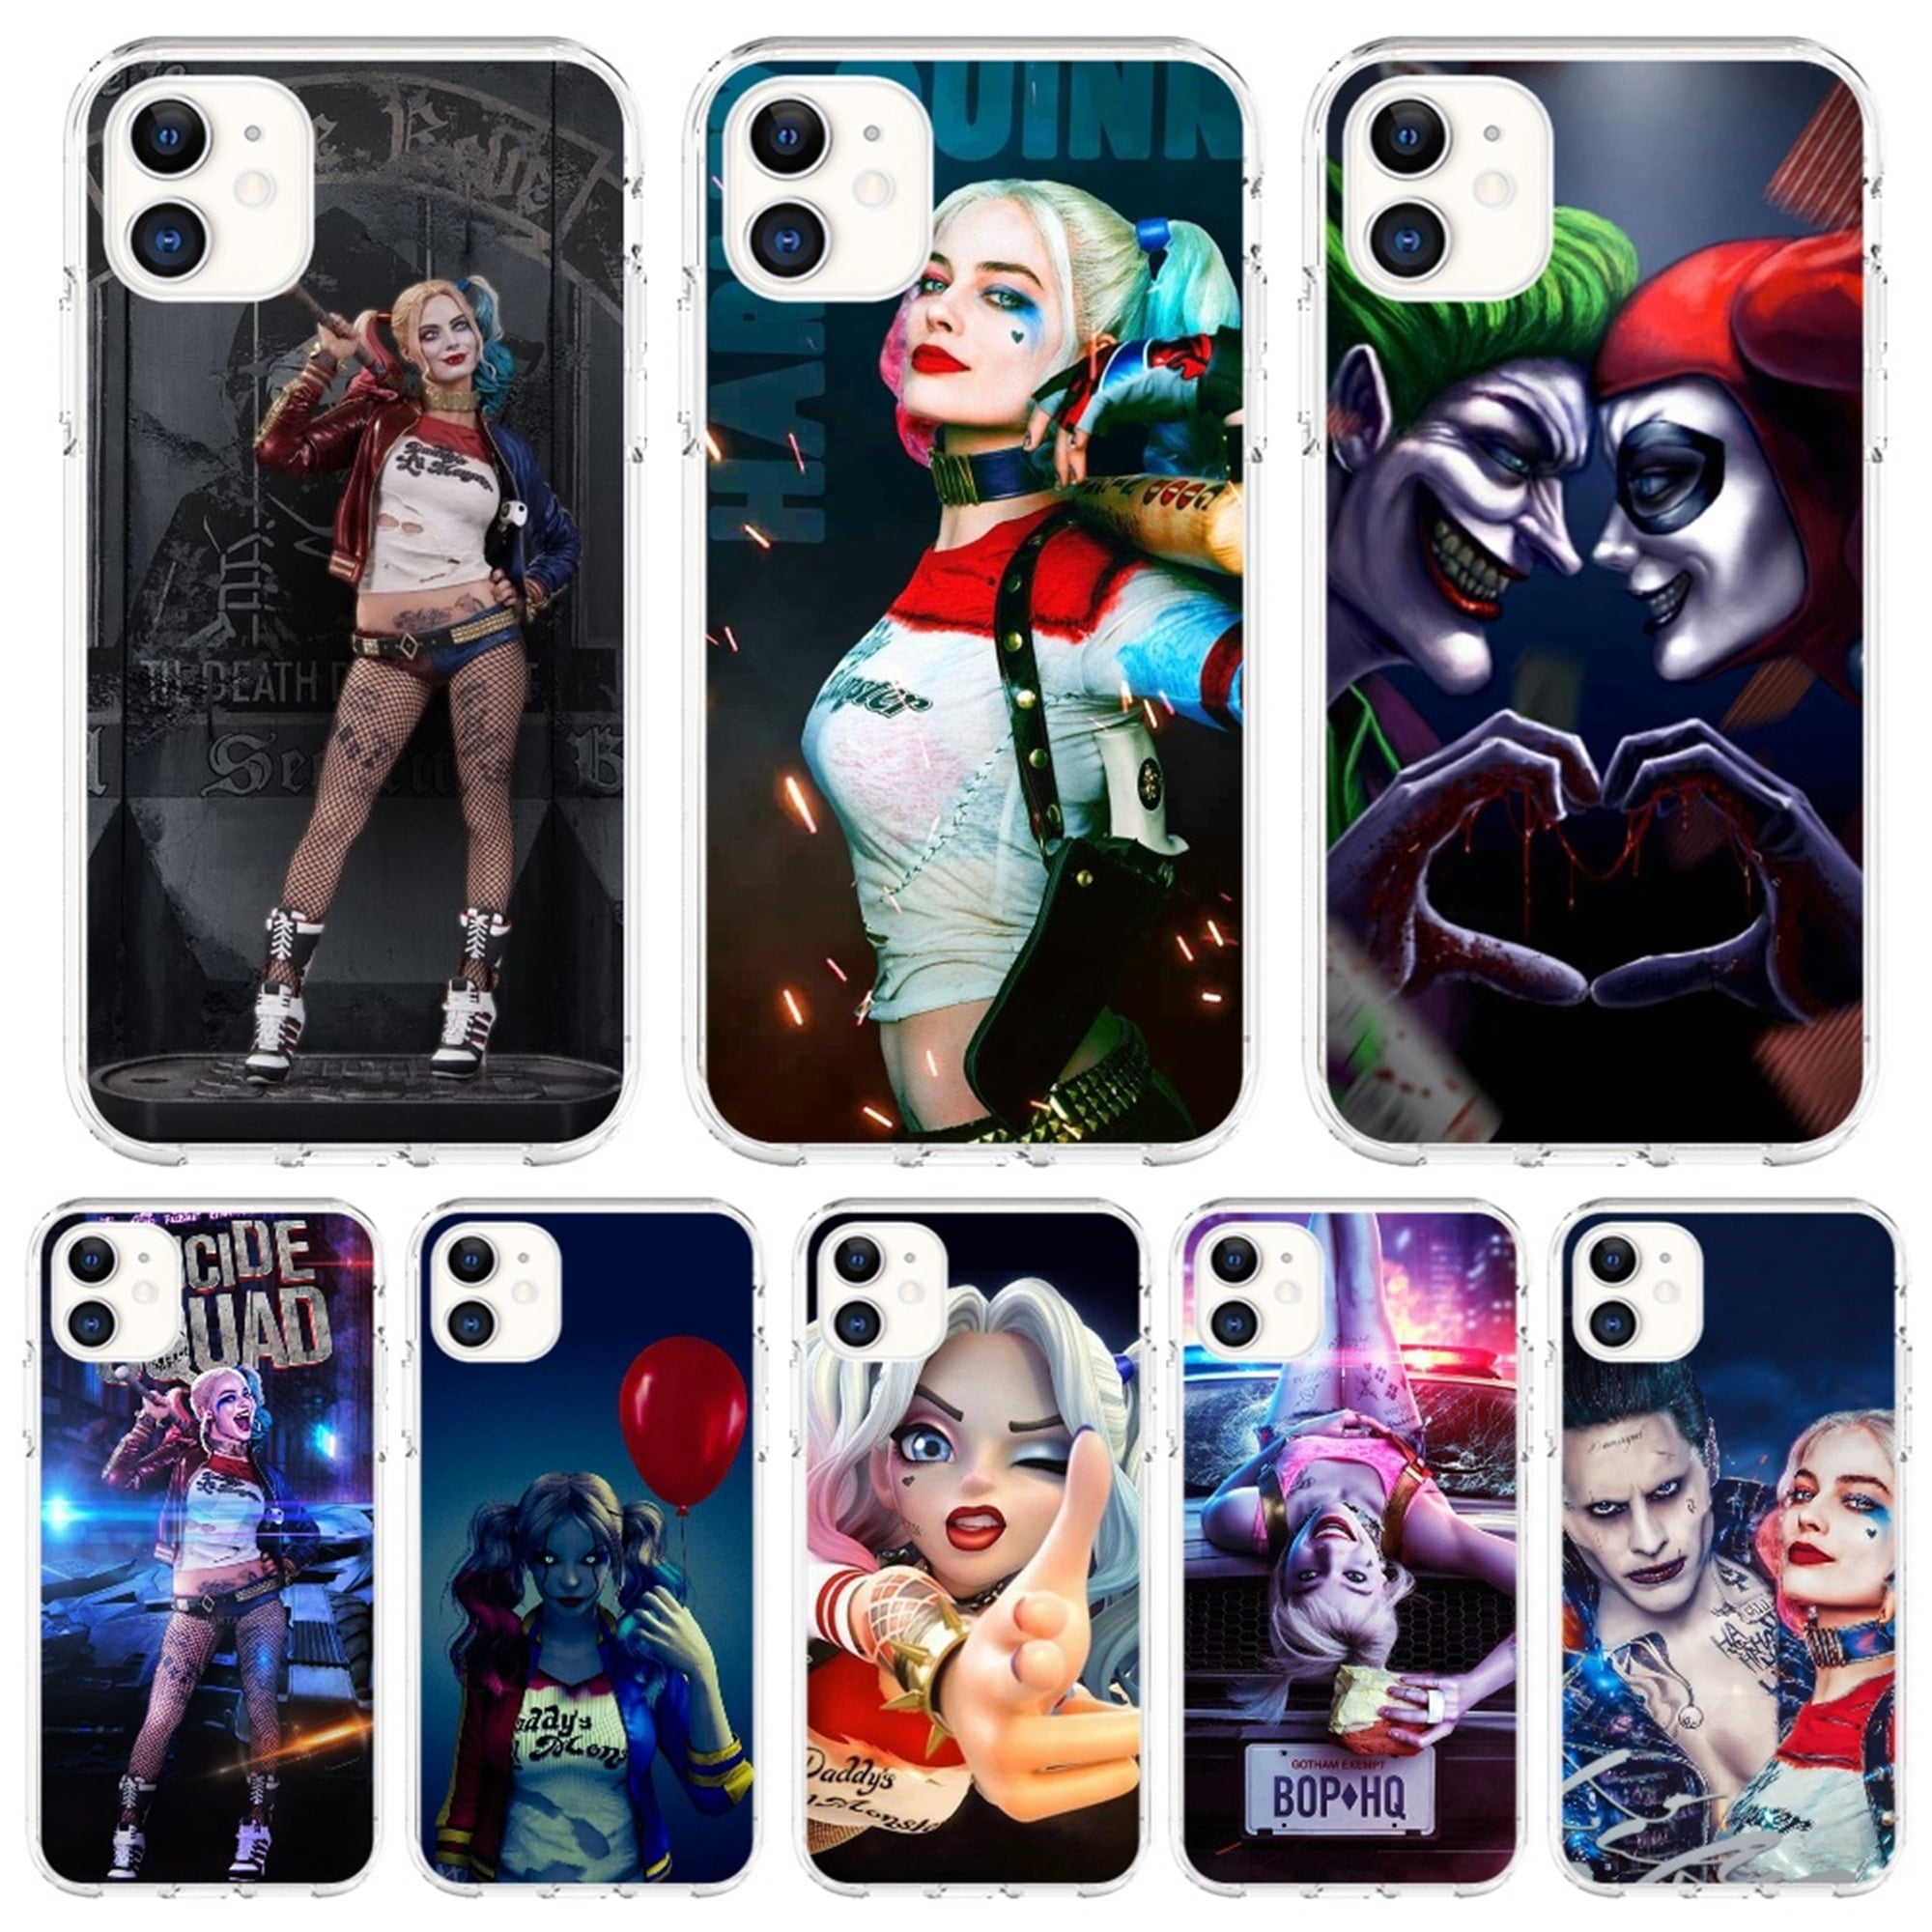 iphone xs max harley quinn xr case funny phone cases iphone xs cover phone cover android phone case best phone cases suicide squad